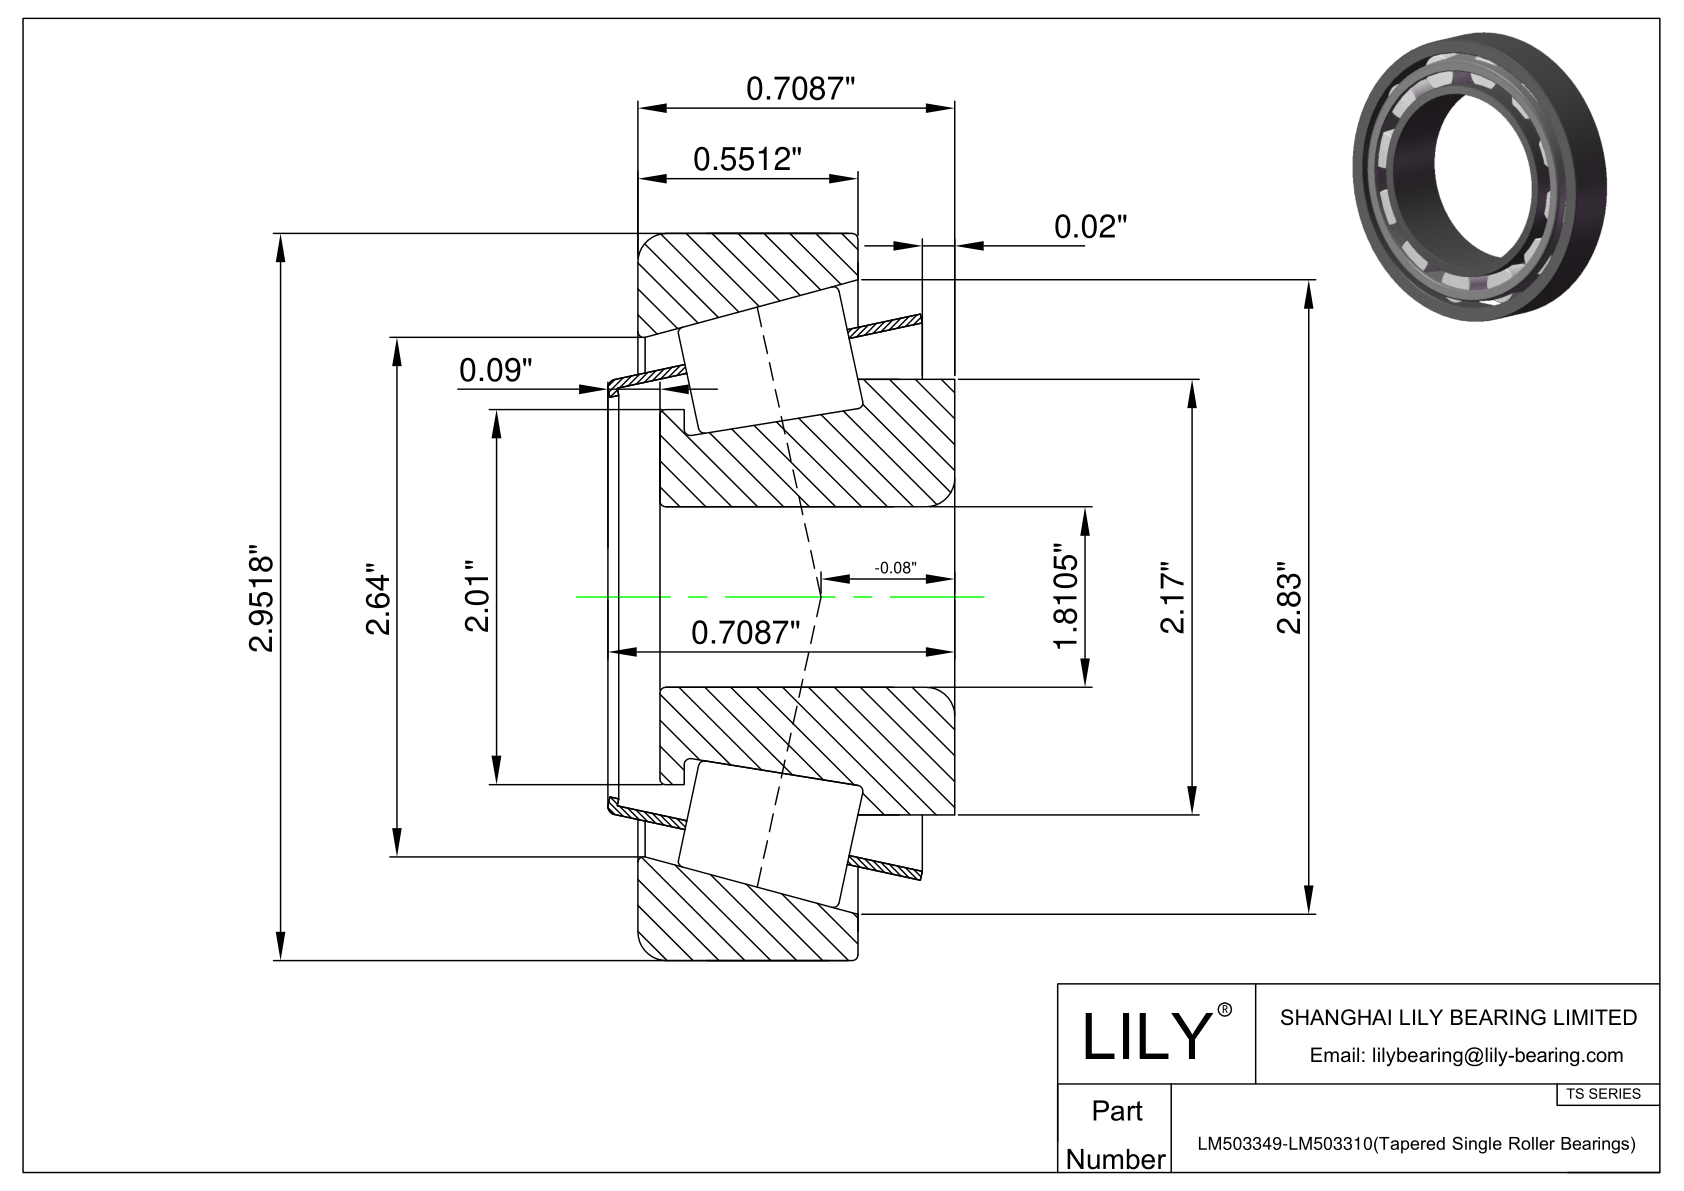 LM503349-LM503310 TS (Tapered Single Roller Bearings) (Imperial) cad drawing